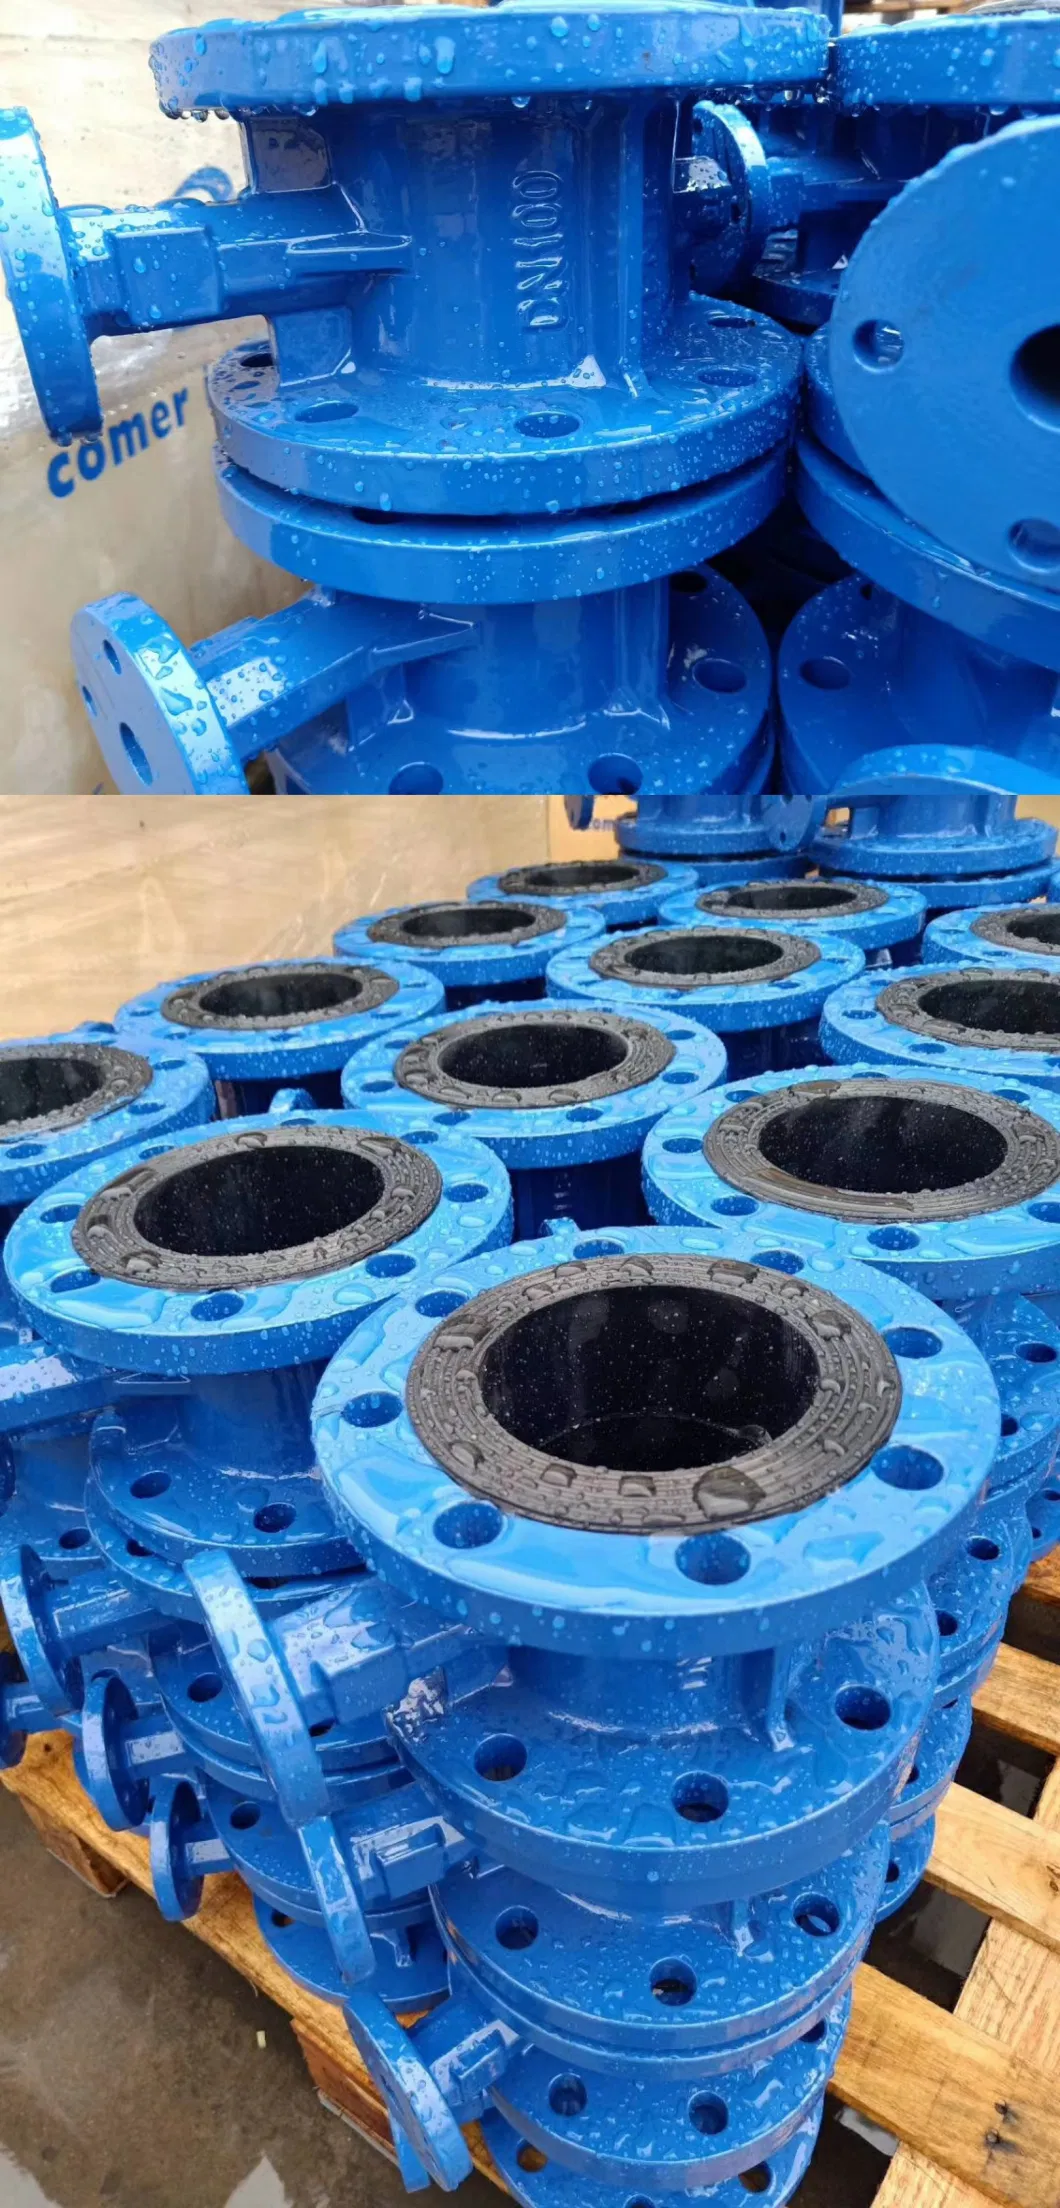 En593 A216 Wcb Wca Wcc Double Flanged Butterfly Valve NBR EPDM Rubber Seat for Marine and Industry